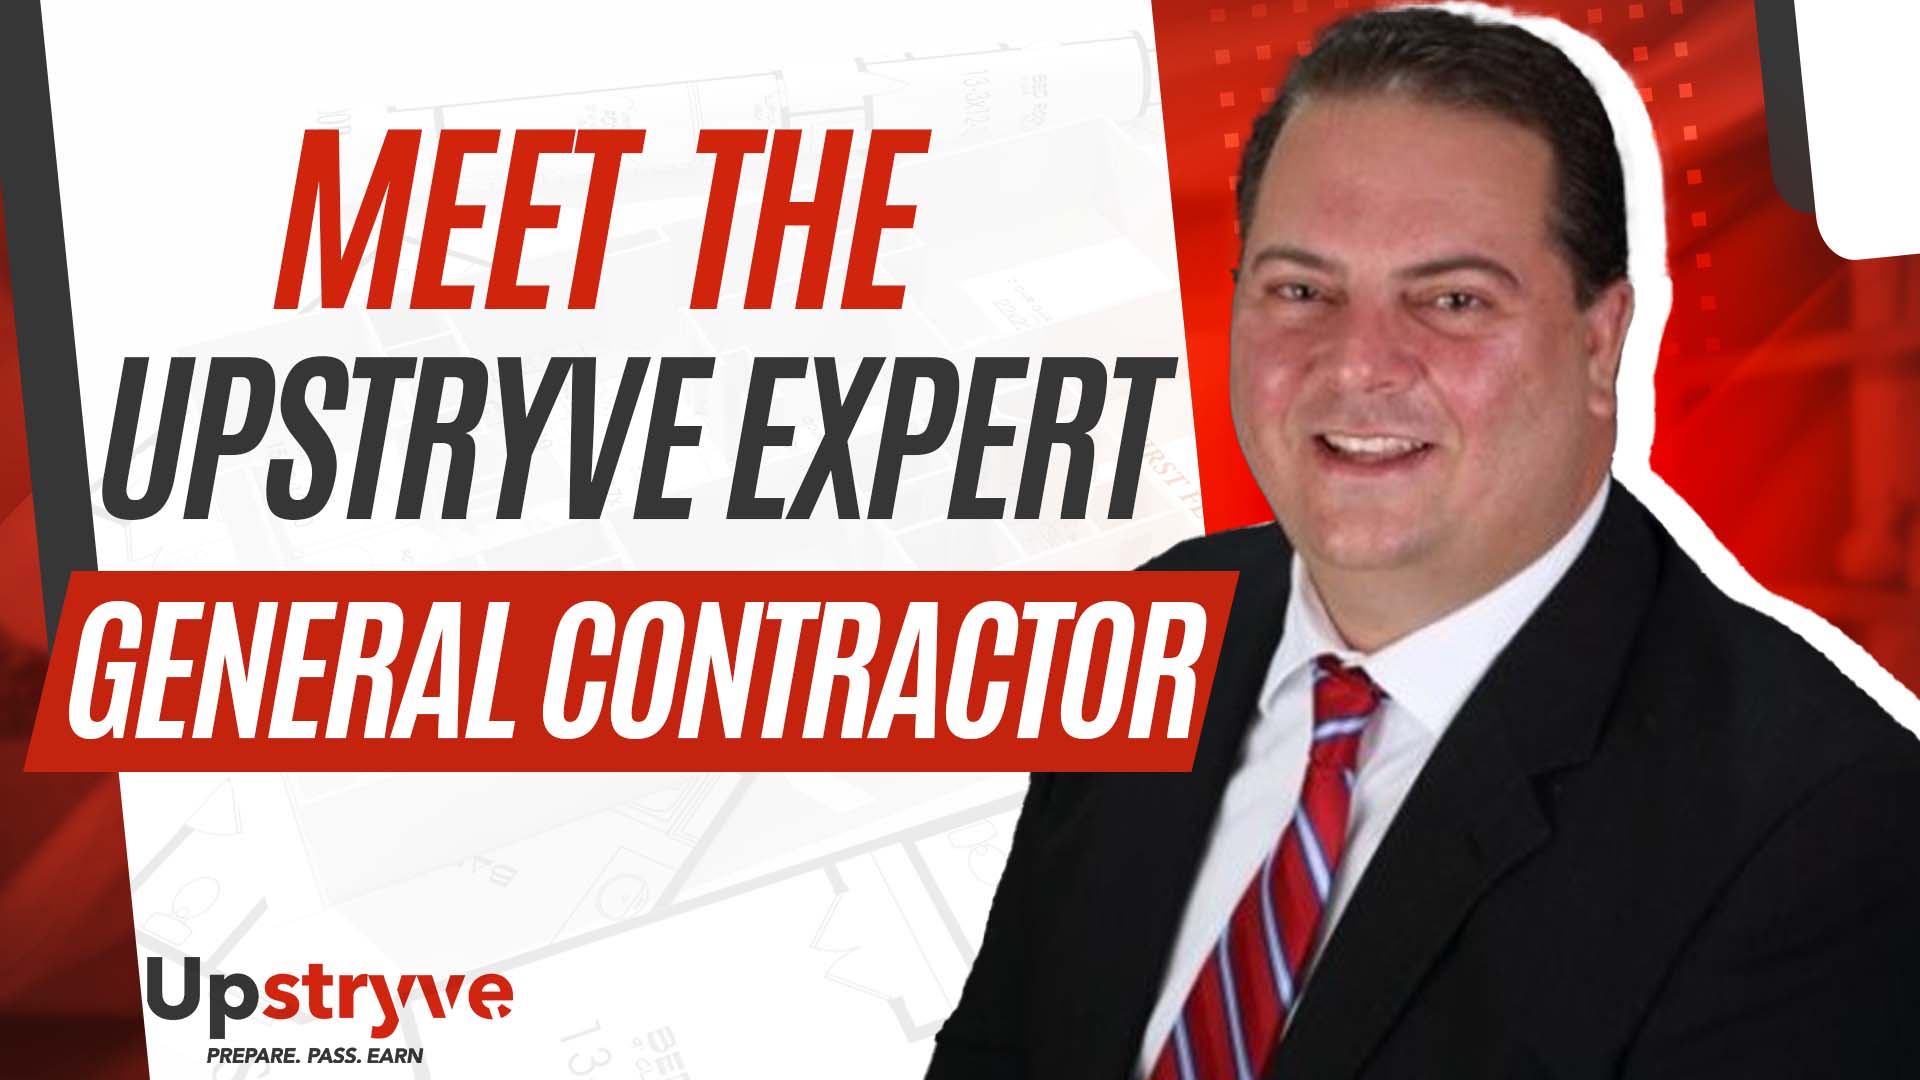 Call us today: 877-938-1888. Meet Florida General Contractor and Upstryve tutor Chris Parlier. Chris Parlier has worked 18 years at Kennedy Space Center with varying levels of responsibility.  He has been a Contractor for 4 years and a NASA project manager for 14 years. Currently, he serves as subject matter expert for a contractor sustaining engineering project management group; ~30 PM’s; $7M annual budget, $~50M in the backlog.

Chris has 23 years of experience in the field; 5 as an employee of a GC building residential homes in the Central Florida Area, 18 years at Kennedy Space. B.S. Mechanical Engineering, M.S. Engineering Management, Florida Certified General Contractor.